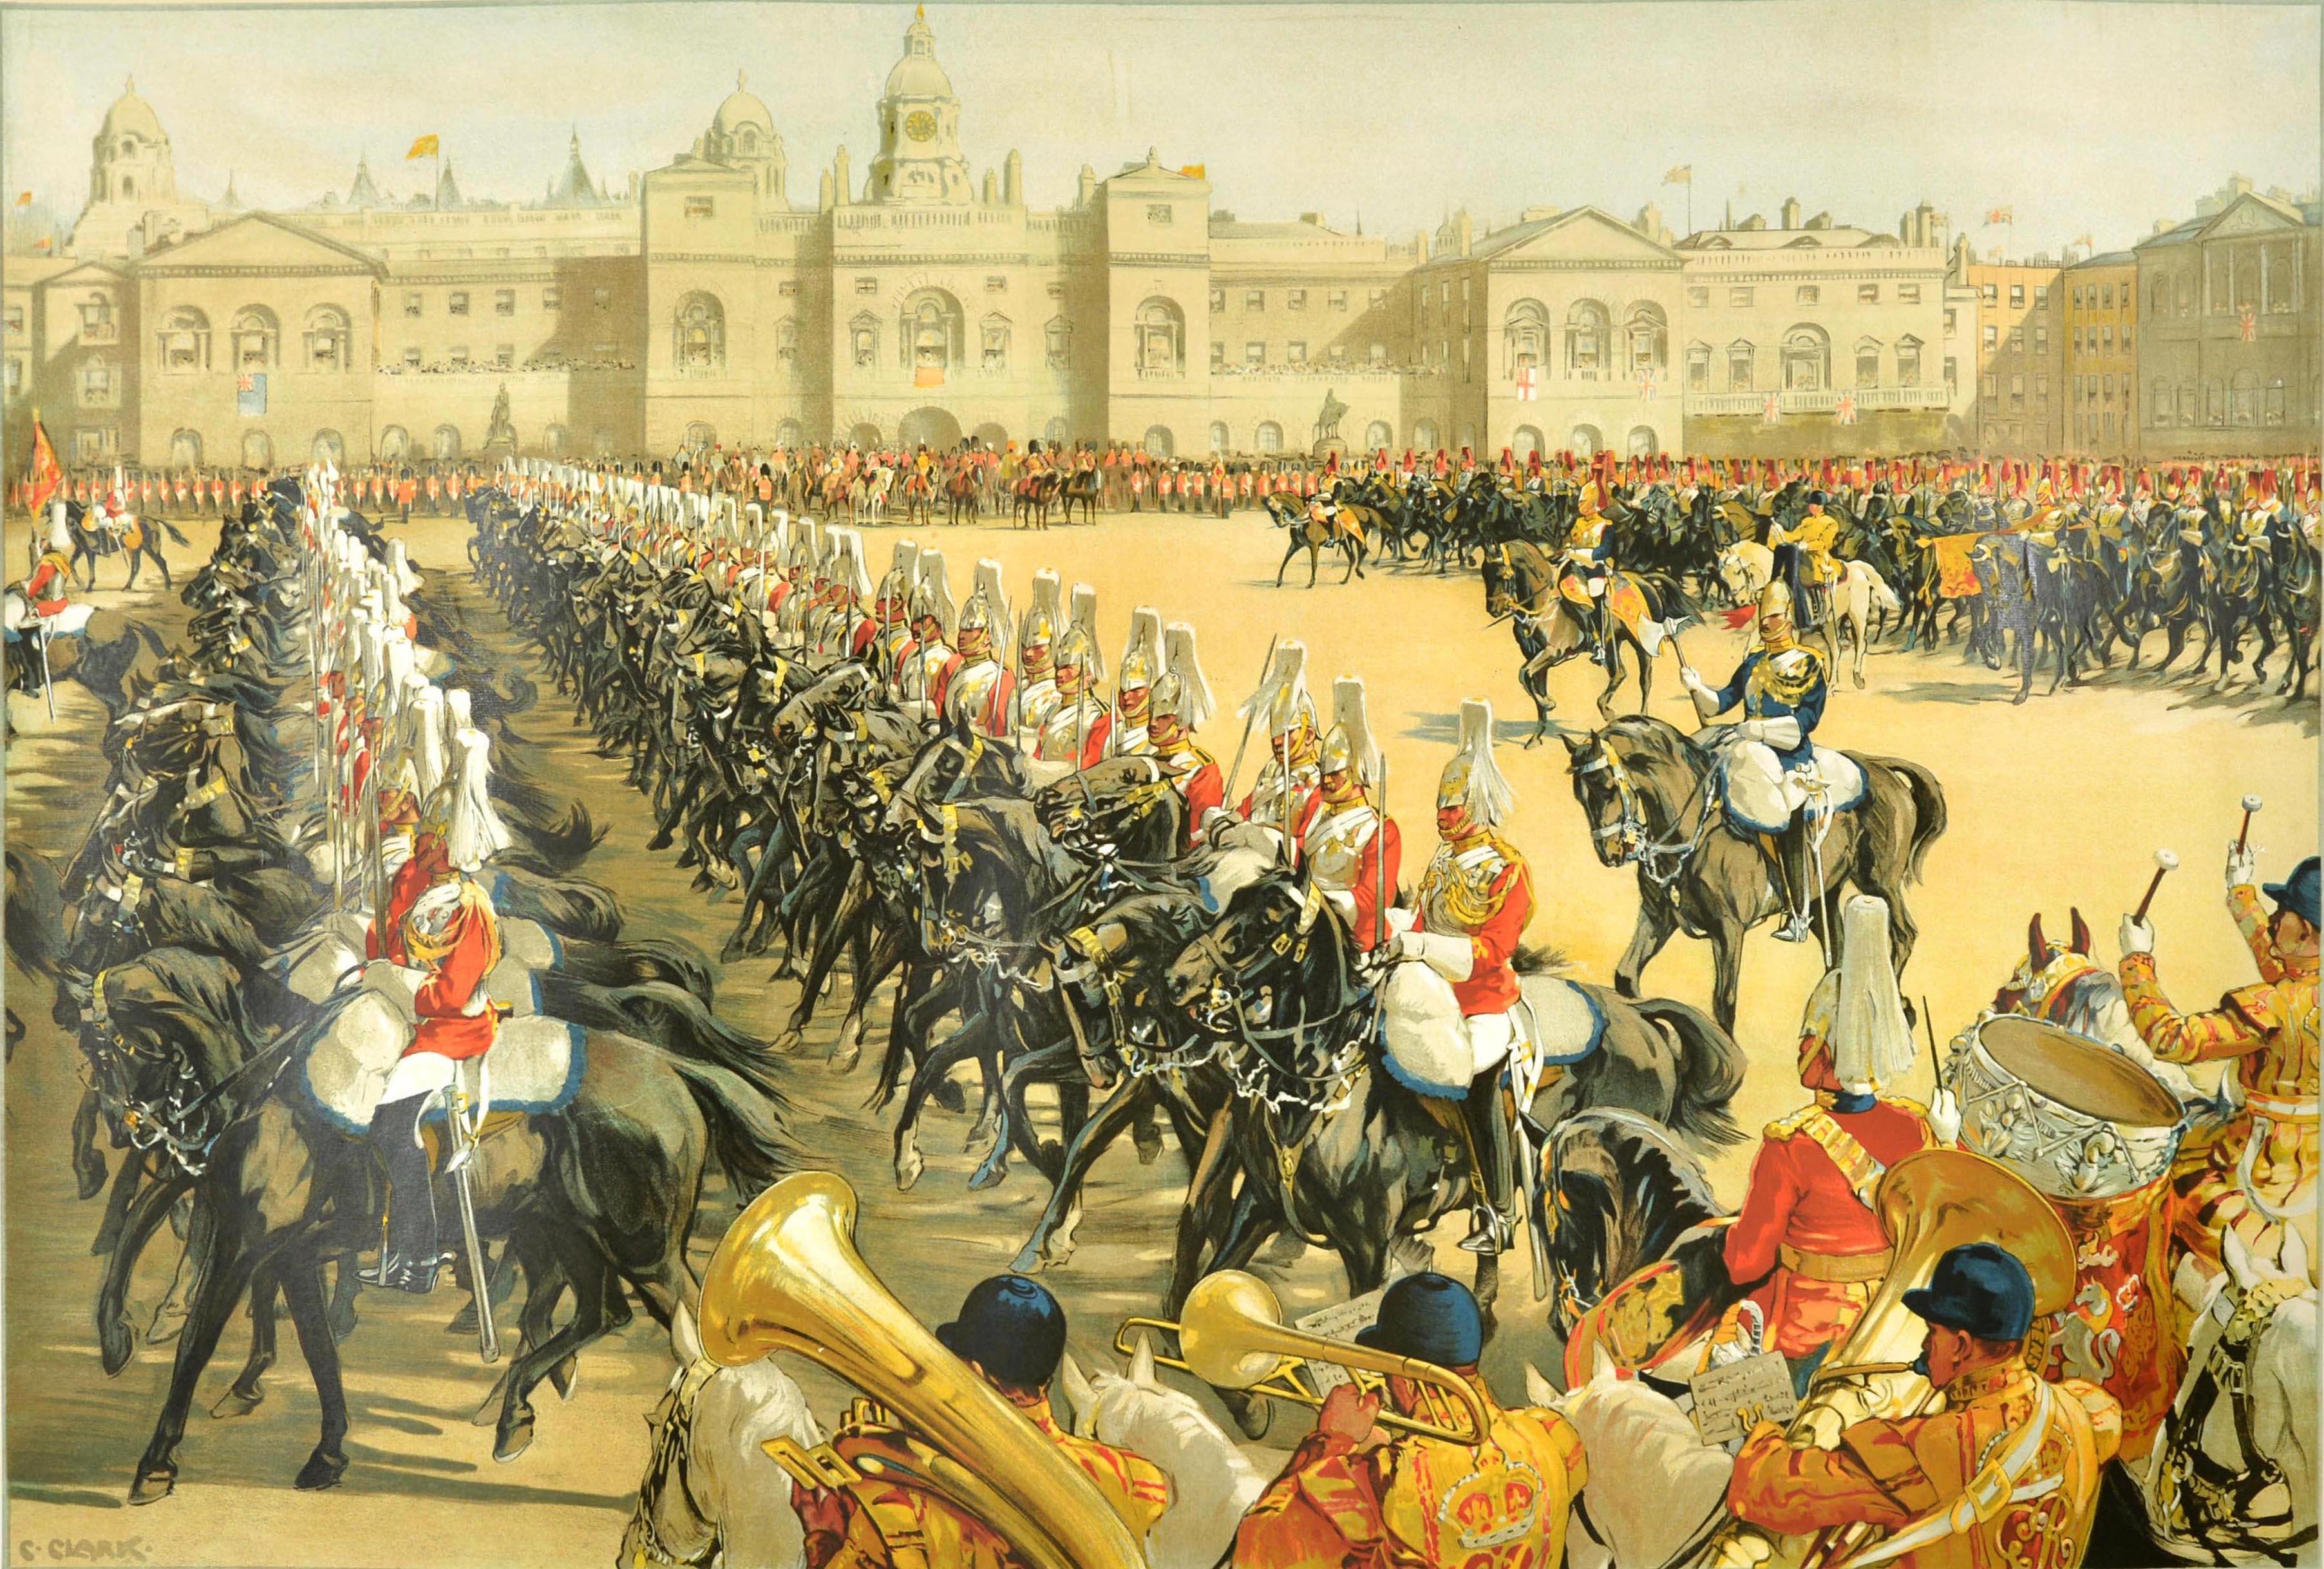 Original Vintage Poster LMS London Midland Scottish Railway Trooping The Colour - Print by Christopher Clark